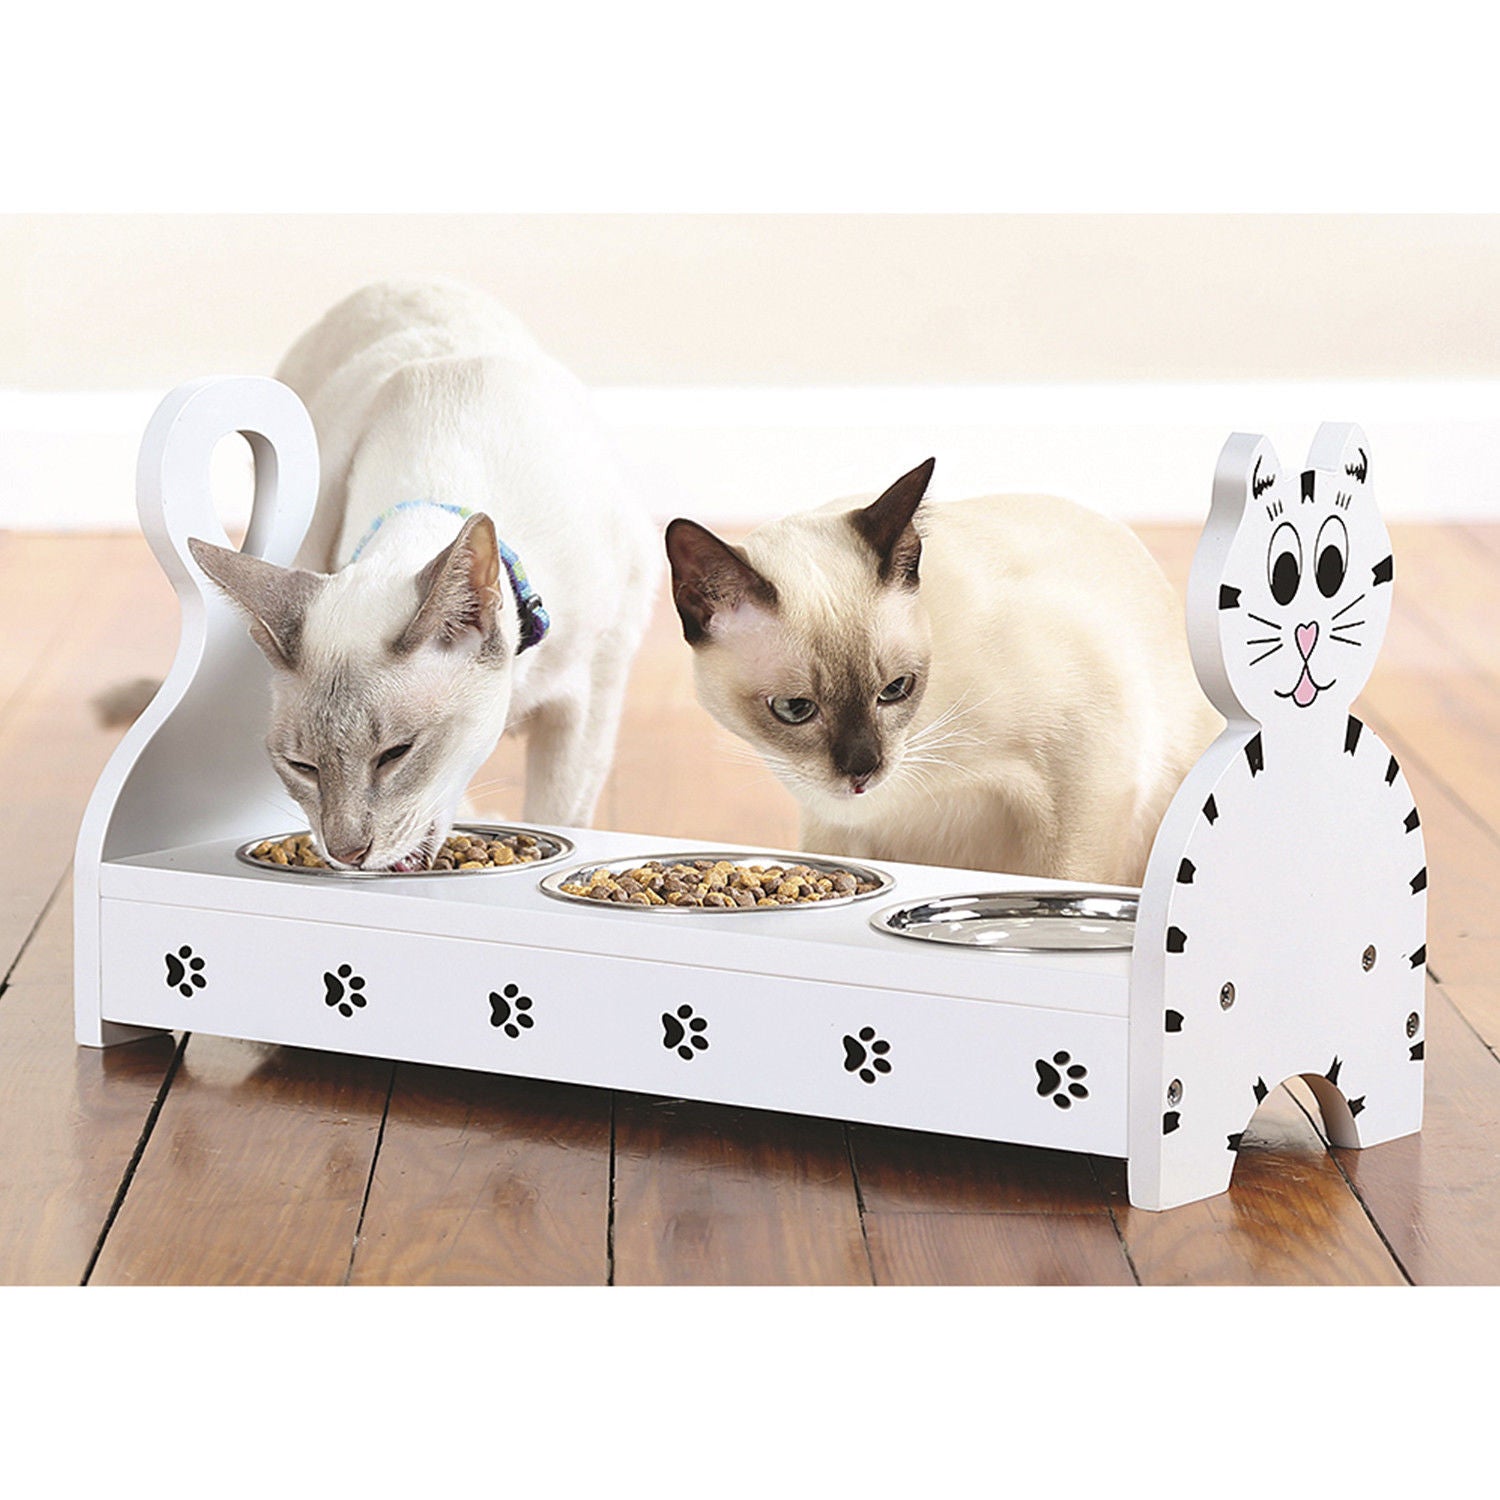 Wood Multiple Cats Pets Feeder Cat Feeding Station Cat Food Bowls Dishes W Stand